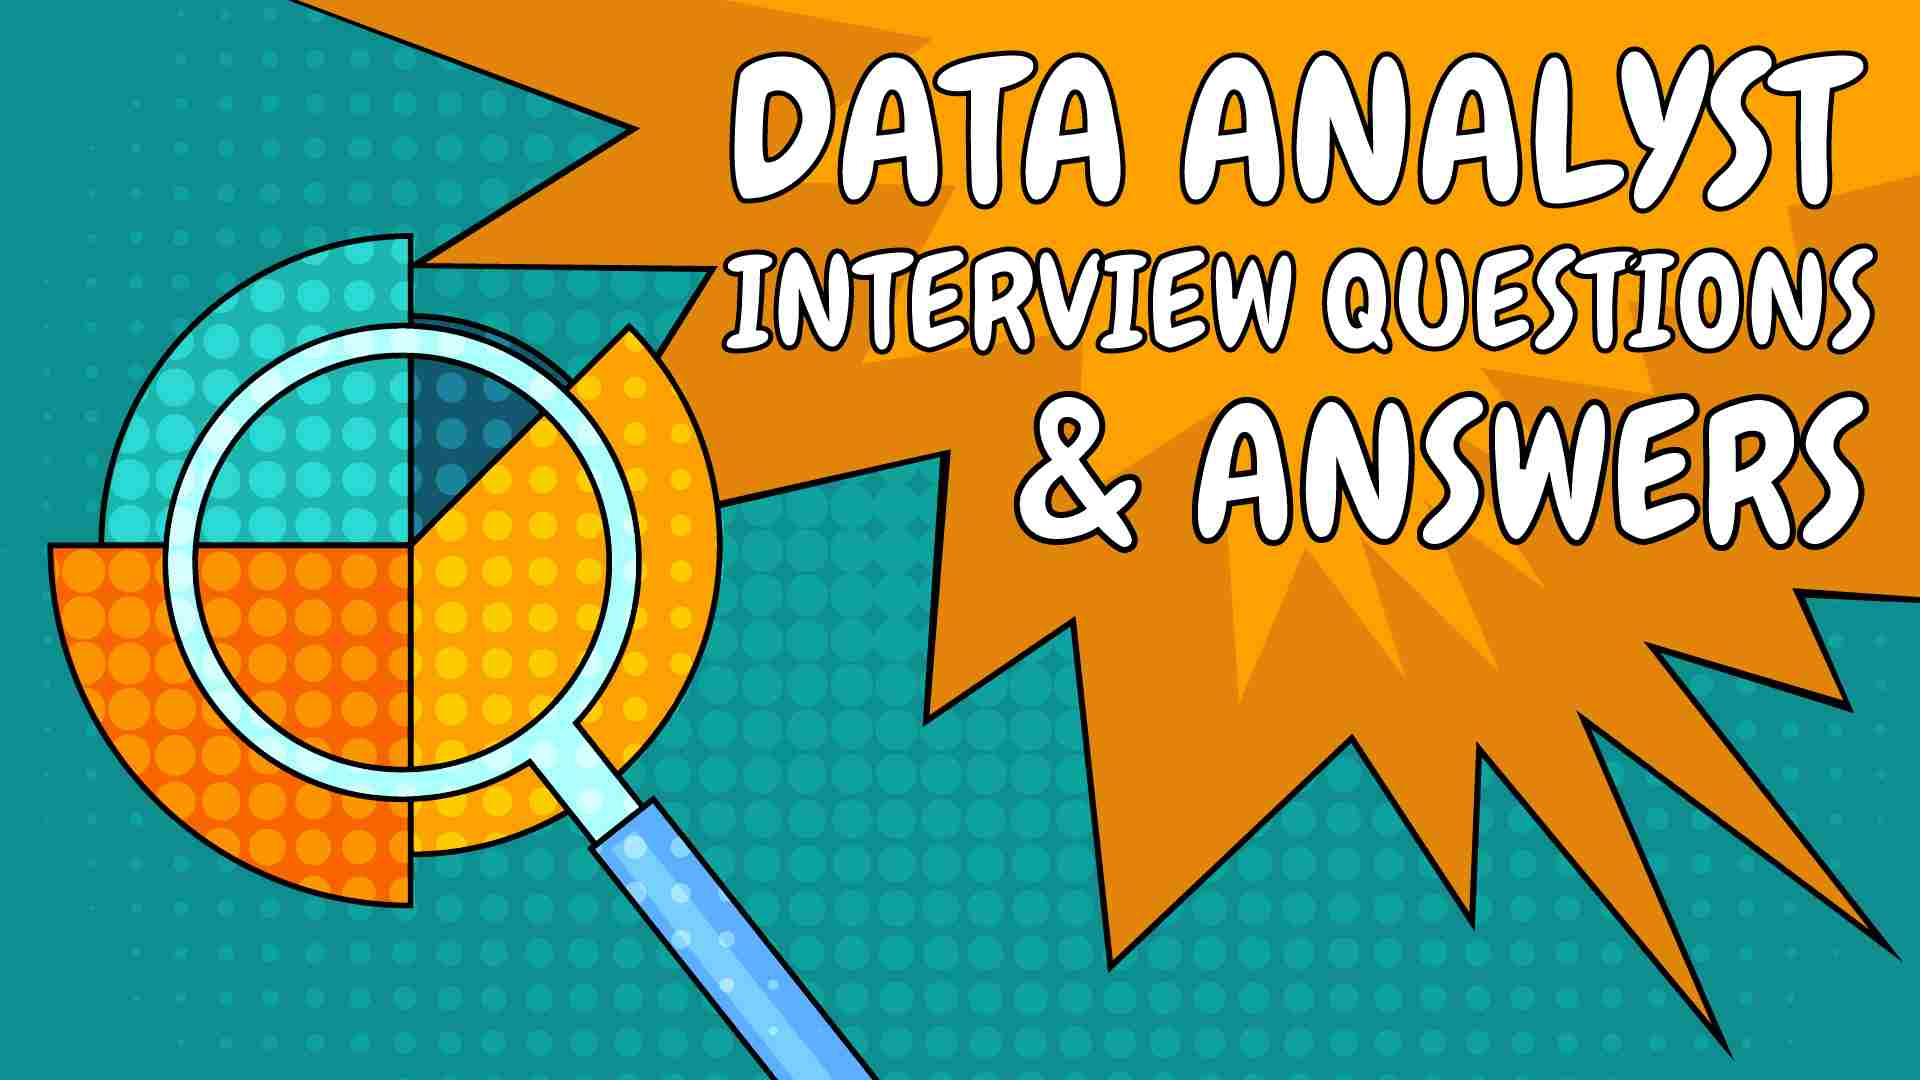 data-analyst-interview-questions-and-answers-2020-365-data-science